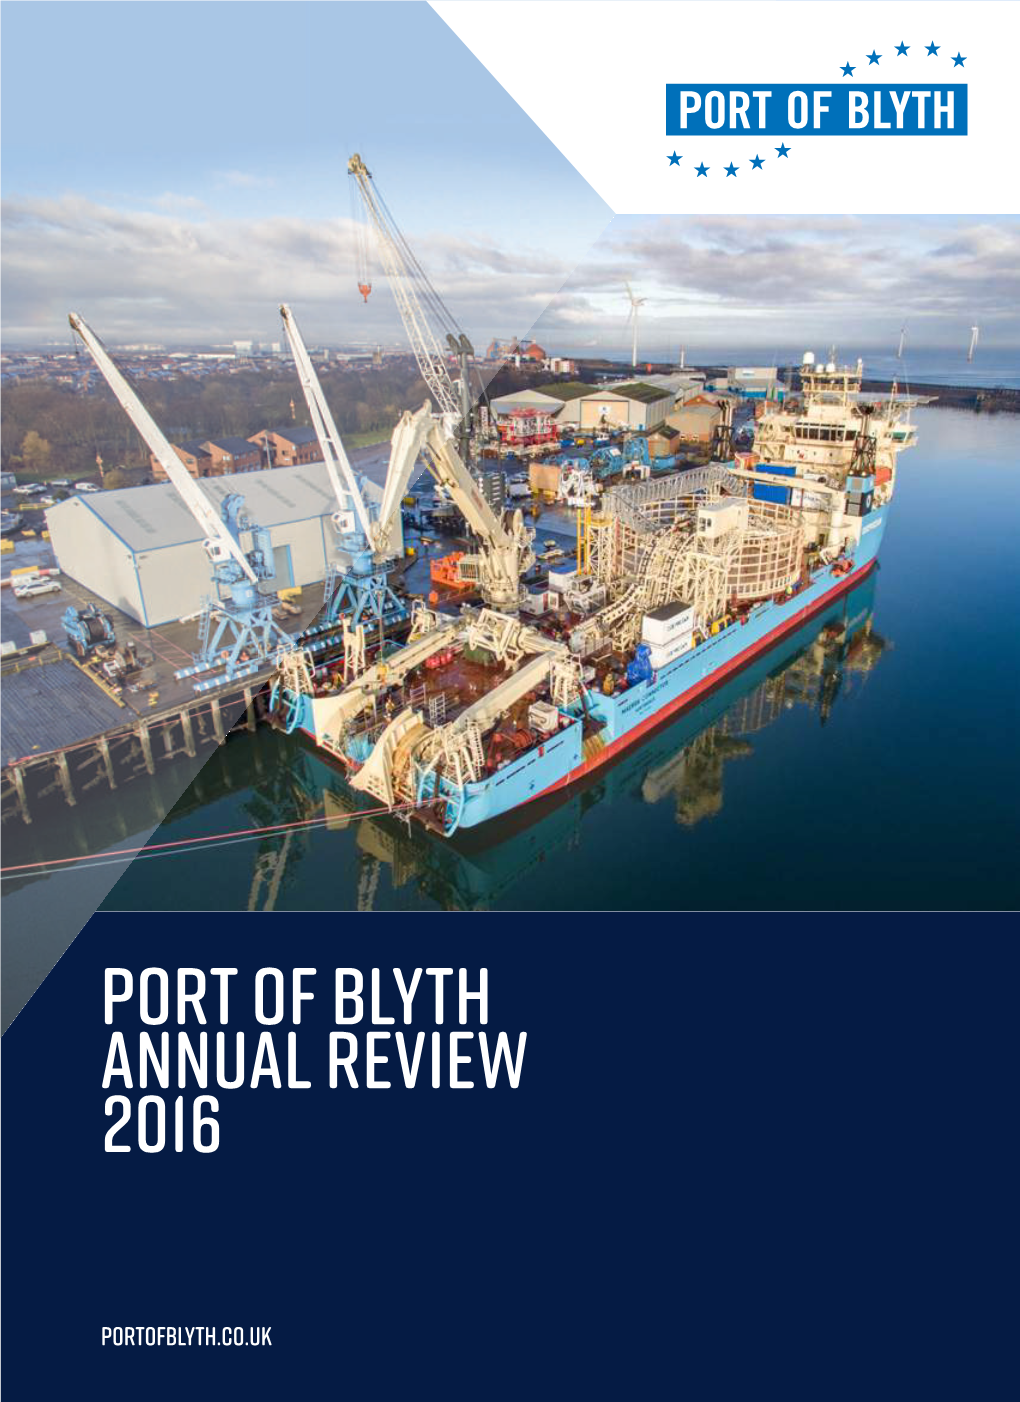 Port of Blyth Annual Review 2016